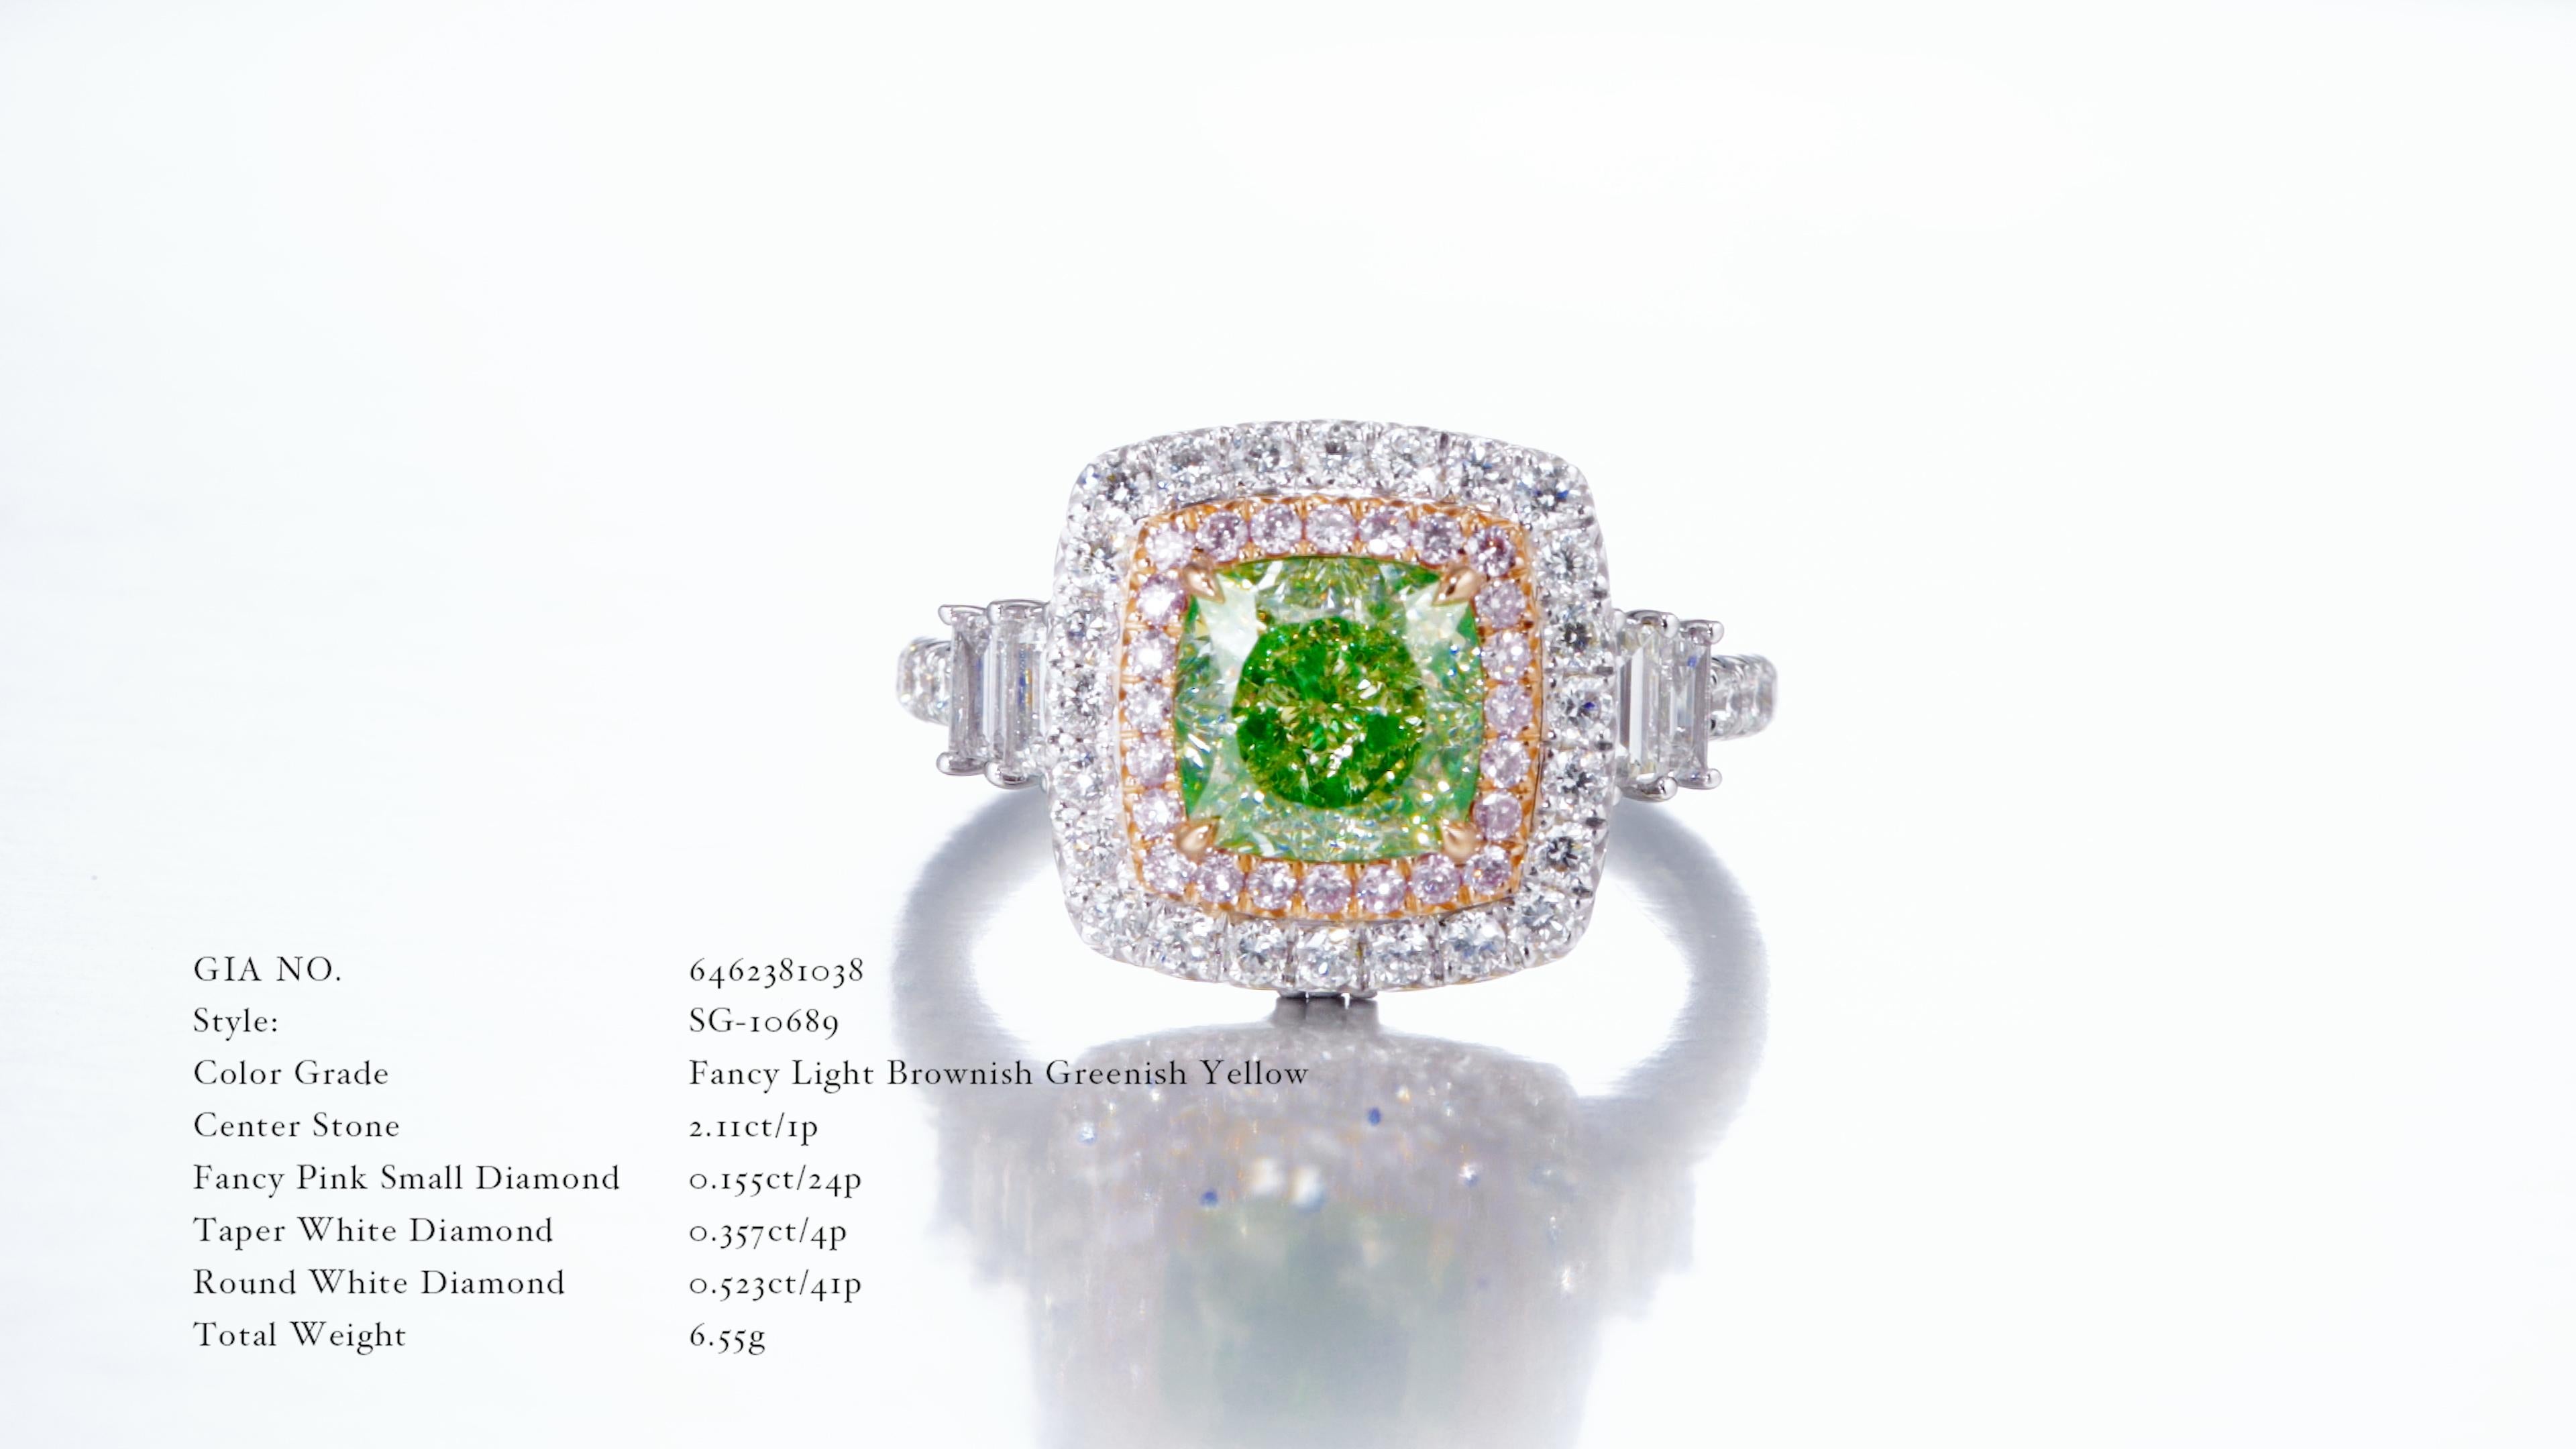 GIA Certified 2.11-carat Natural Fancy Light Brownish Greenish Yellow Cushion Ring, a masterpiece that captivates with its enchanting green hue and exquisite design. This ring showcases a central diamond with a mesmerizing greenish-yellow tint,